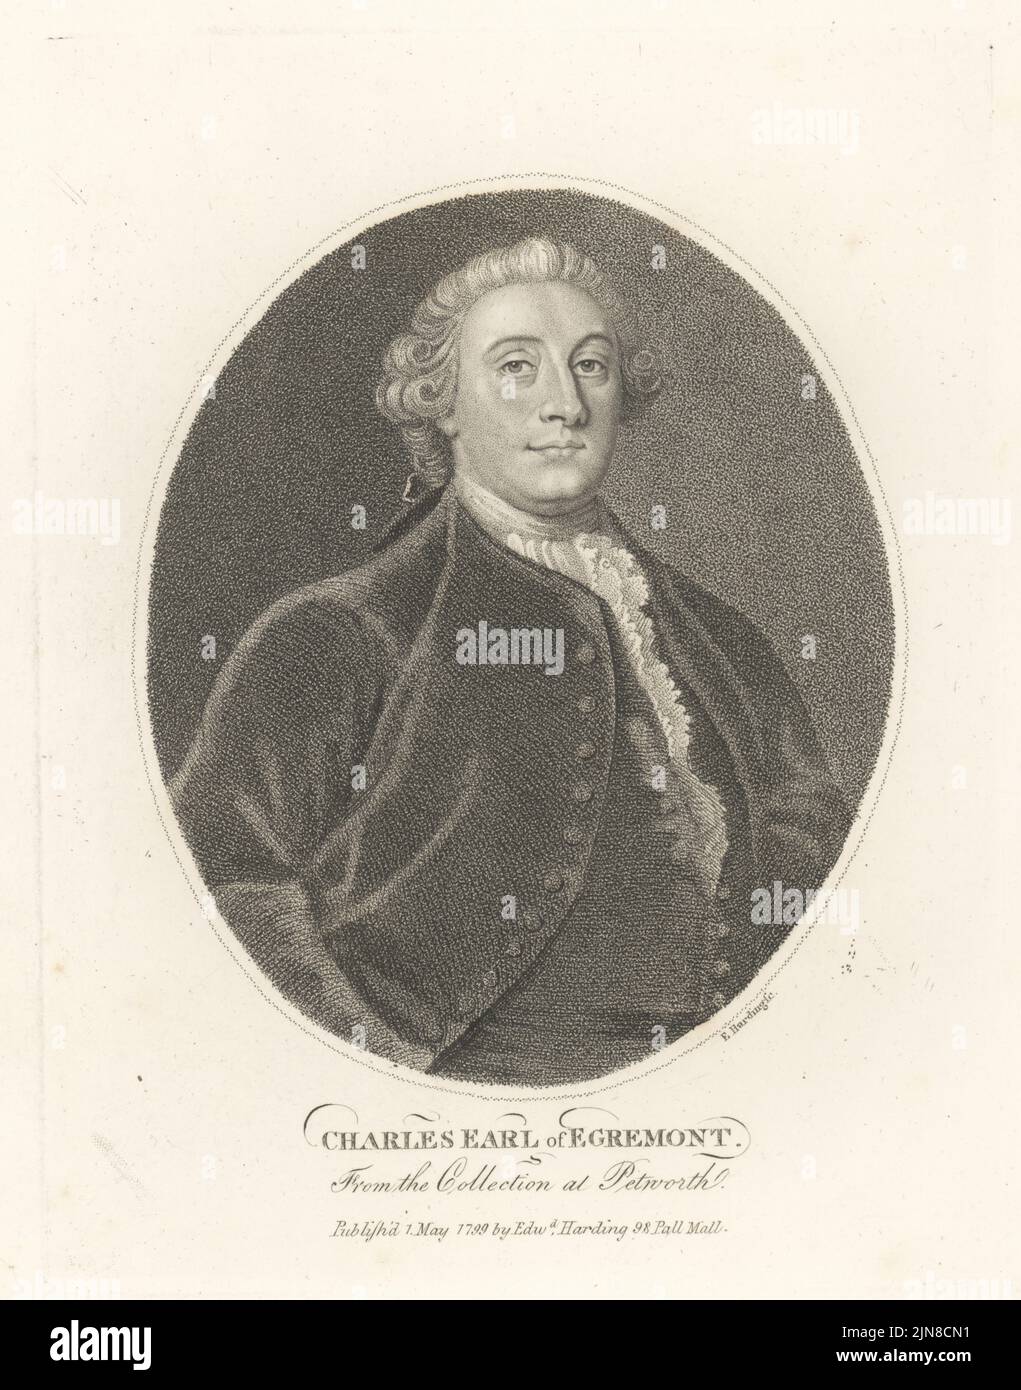 Charles Wyndham, 2nd Earl of Egremont, 1710-1763. British statesman, MP, and later Secretary of State. Charles, Earl of Egremont. From a painting in the collection at Petworth House. Copperplate engraving by Edward Harding after William Hoare from John Adolphus’ The British Cabinet, containing Portraits of Illustrious Personages, printed by T. Bensley for E. Harding, 98 Pall Mall, London, 1800. Stock Photo